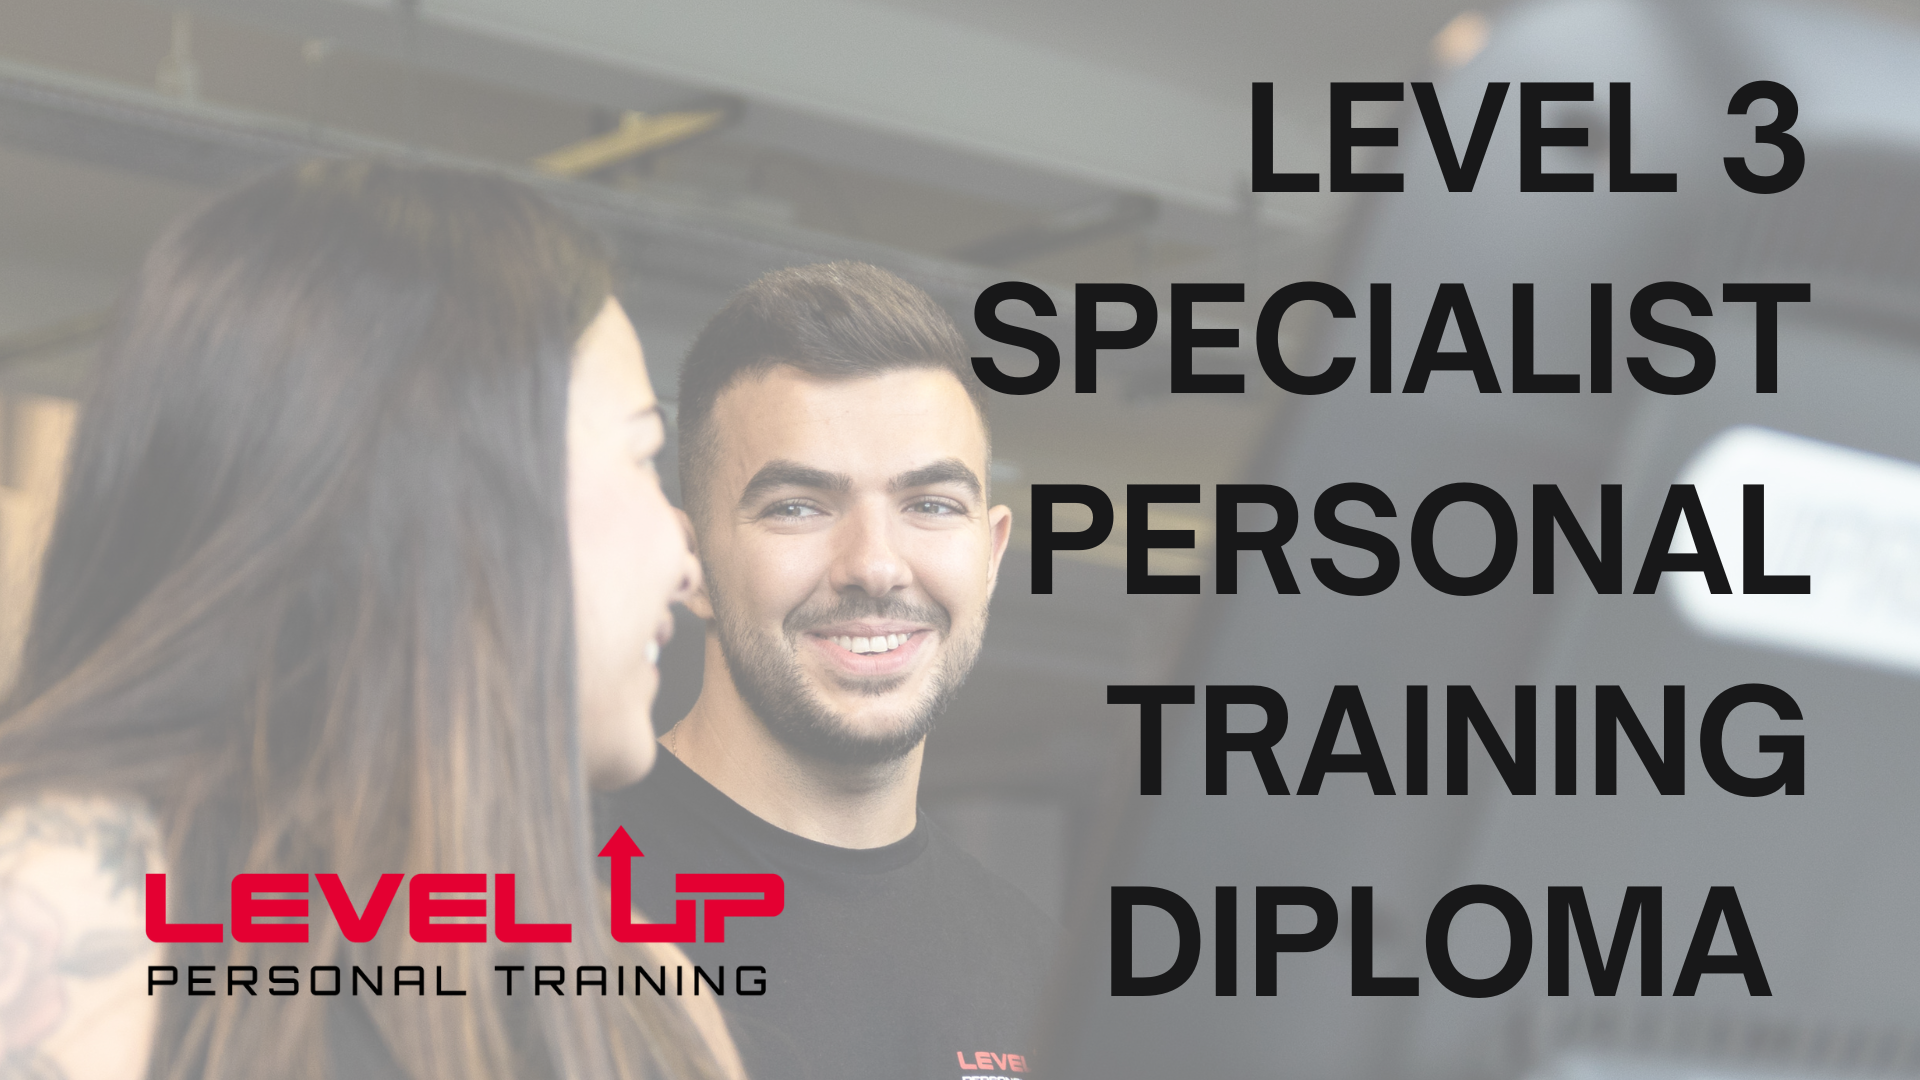 personal training qualifications